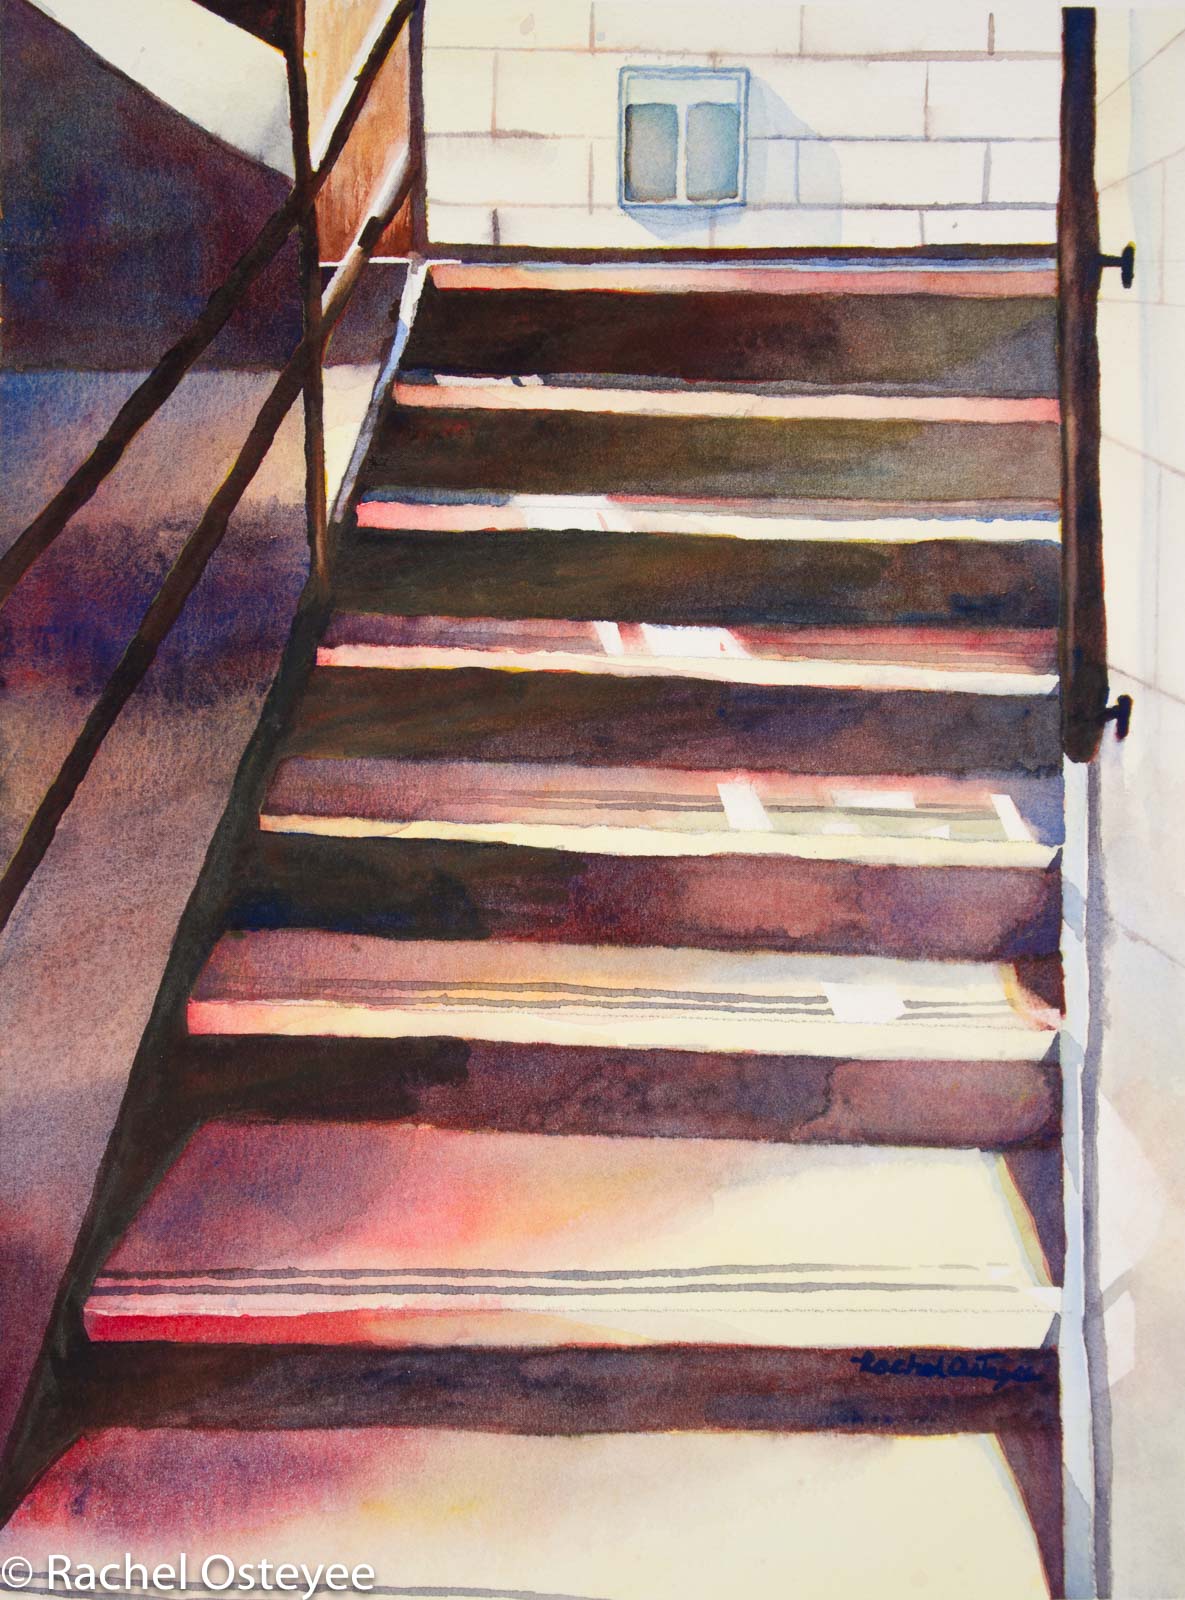 Stairwell (11" x 15", Watercolor)